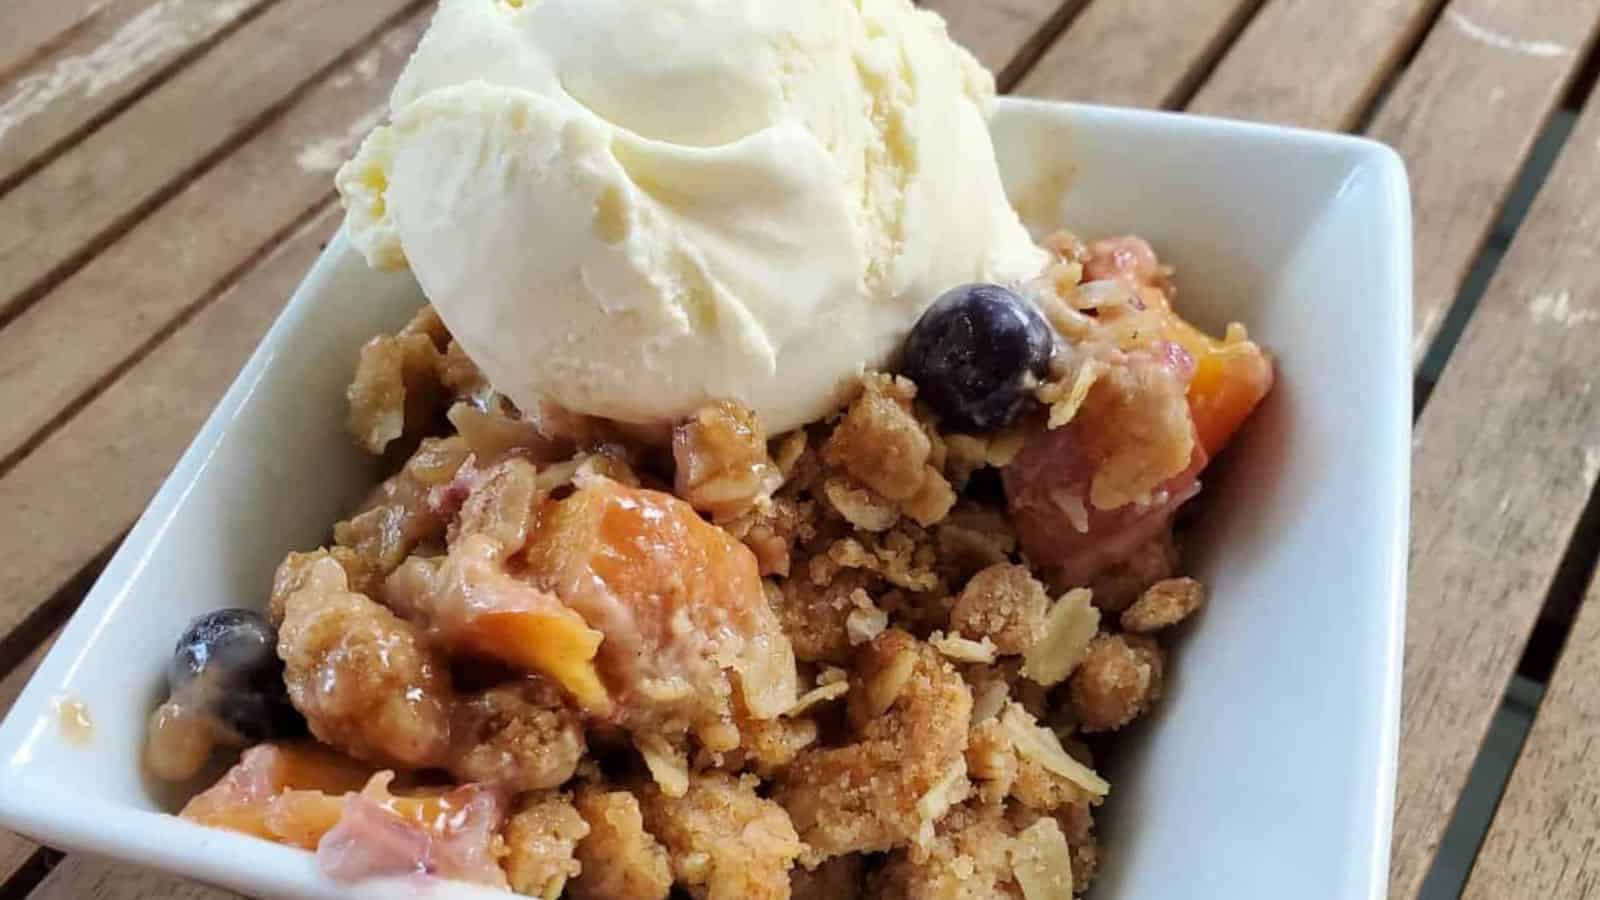 Image shows a white bowl with a serving of blueberry peach crisp topped with a scoop of ice cream and some whipped cream.